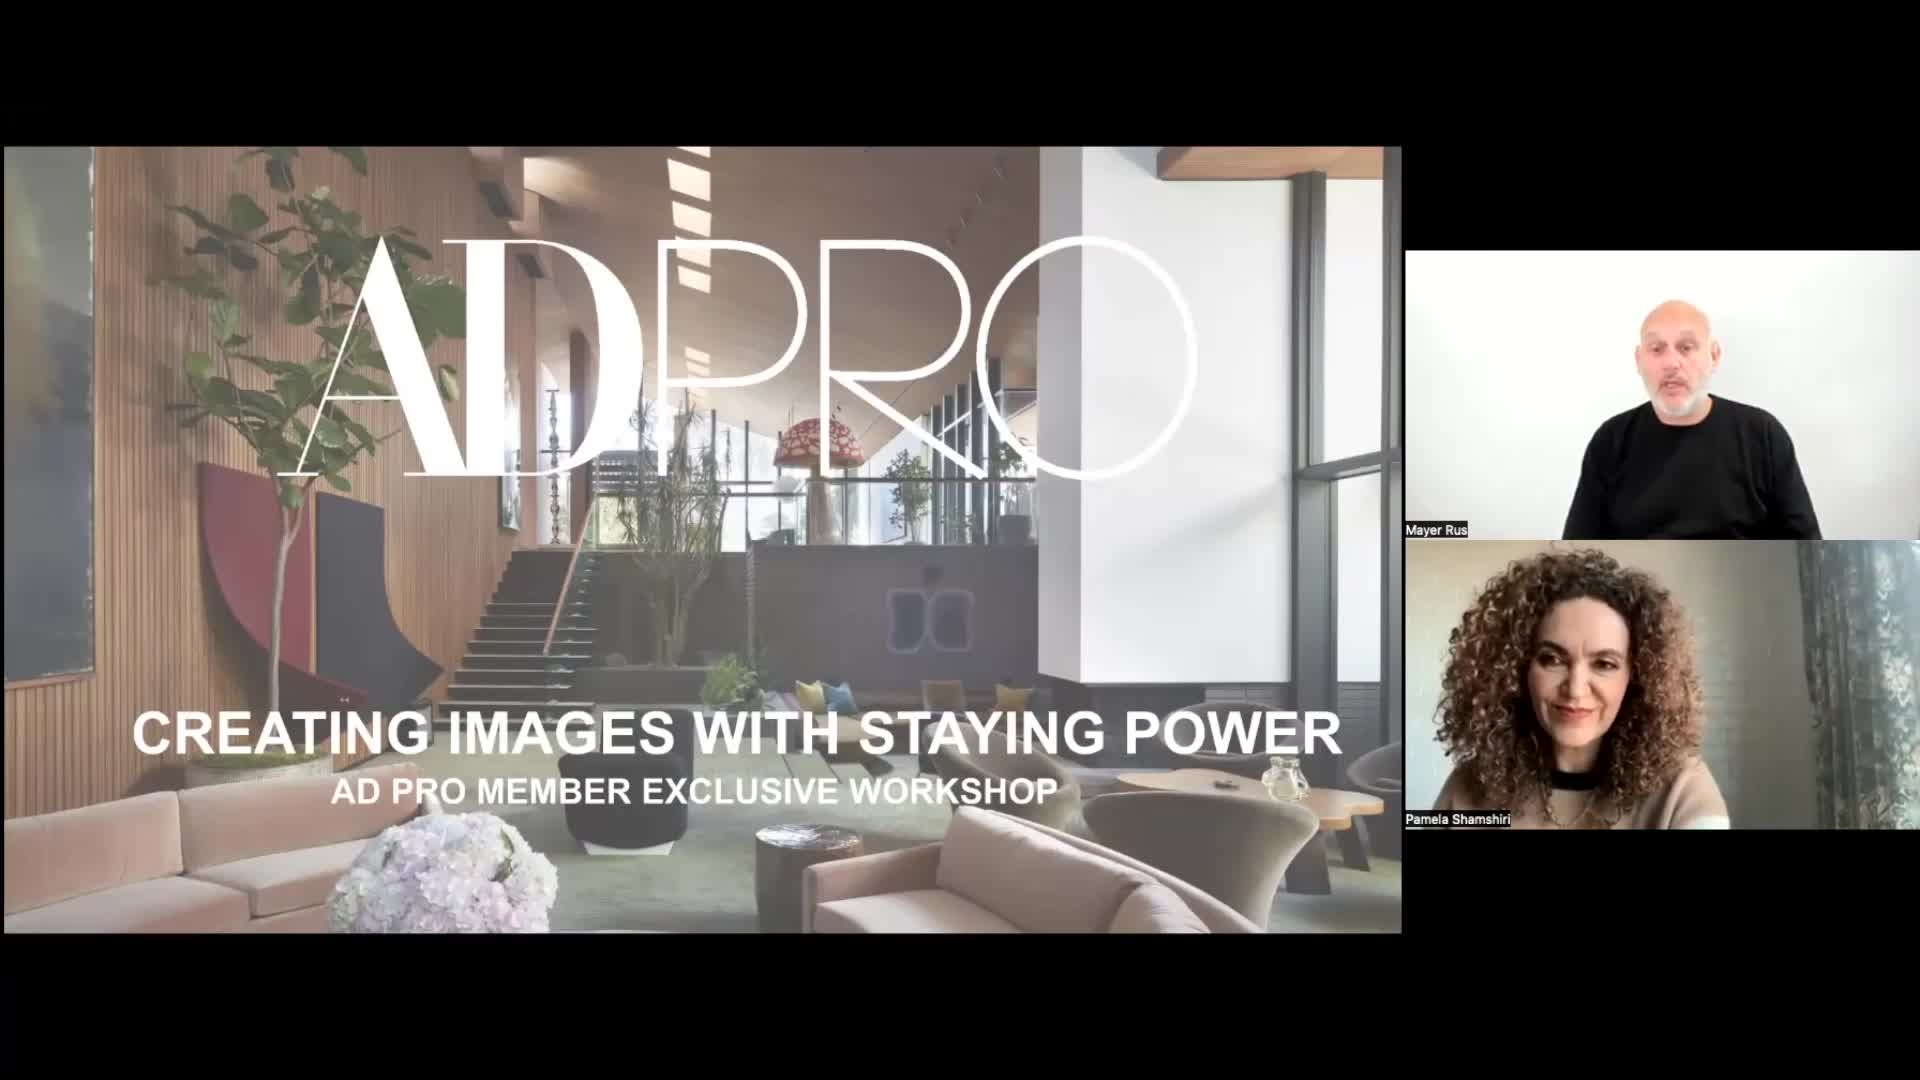 Watch Member Exclusive Workshop: Creating Images With Staying